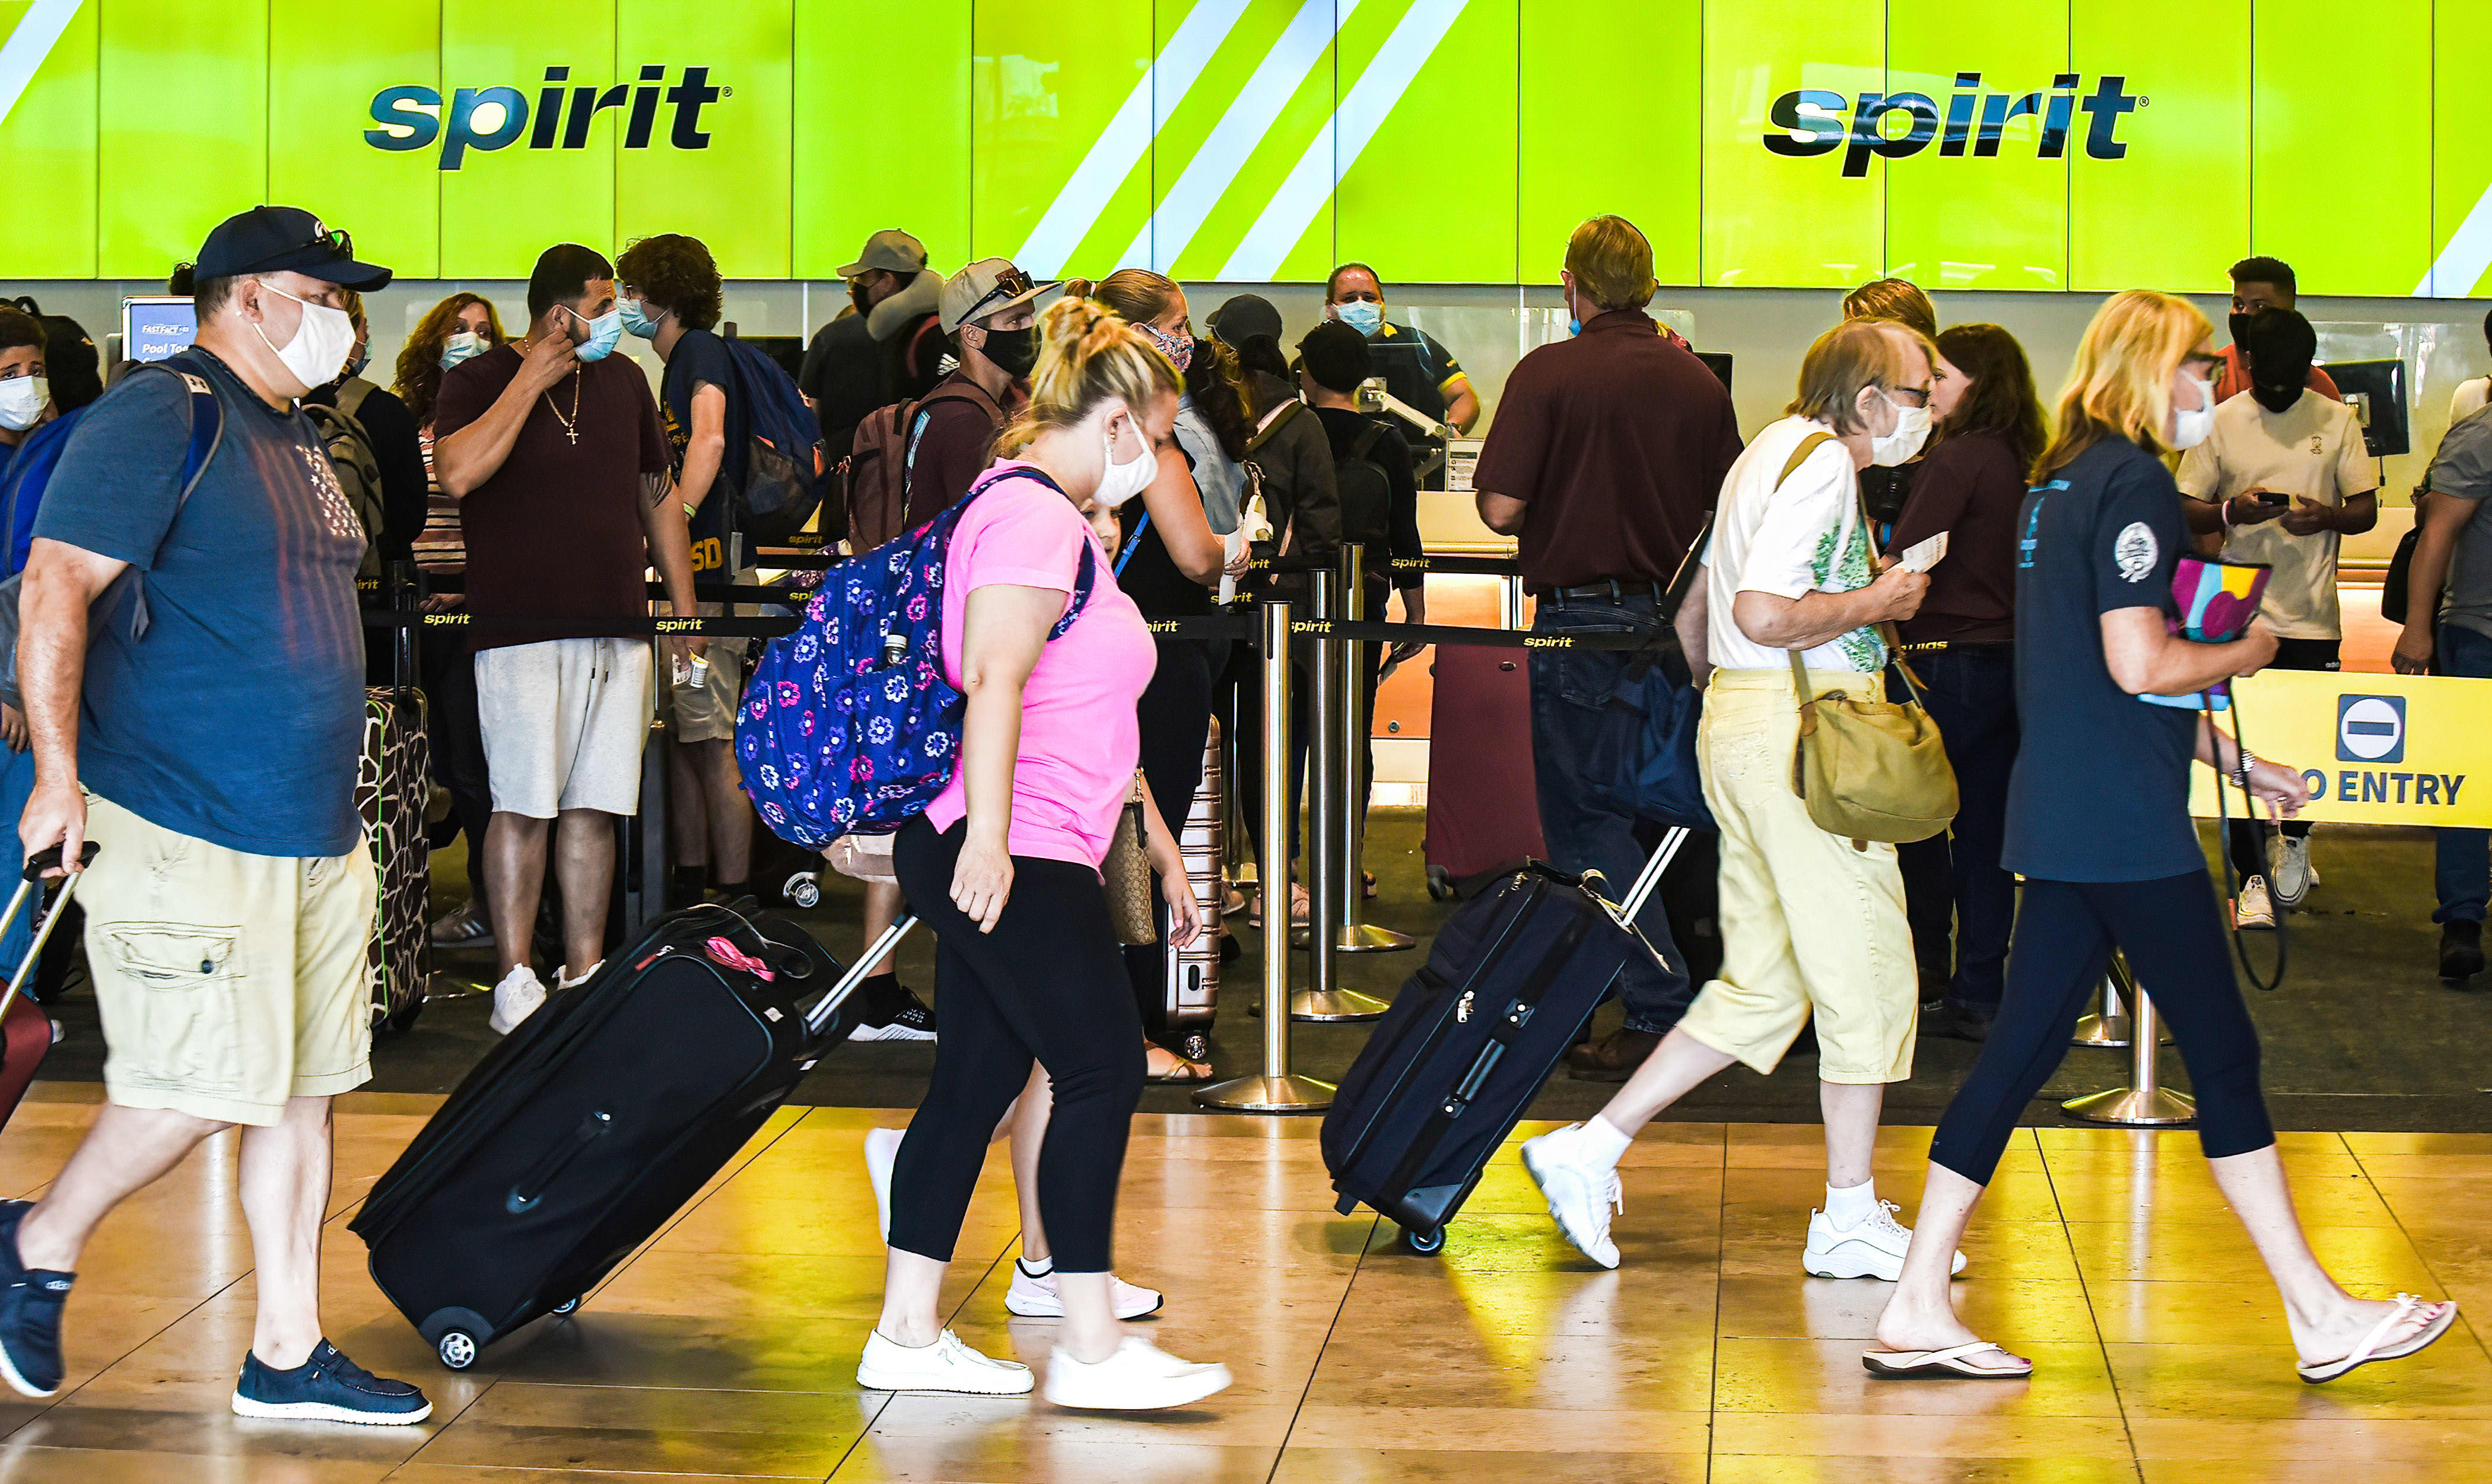 Spirit and Frontier are merging into a massive discount airline. Here’s what that means for travelers – CNBC